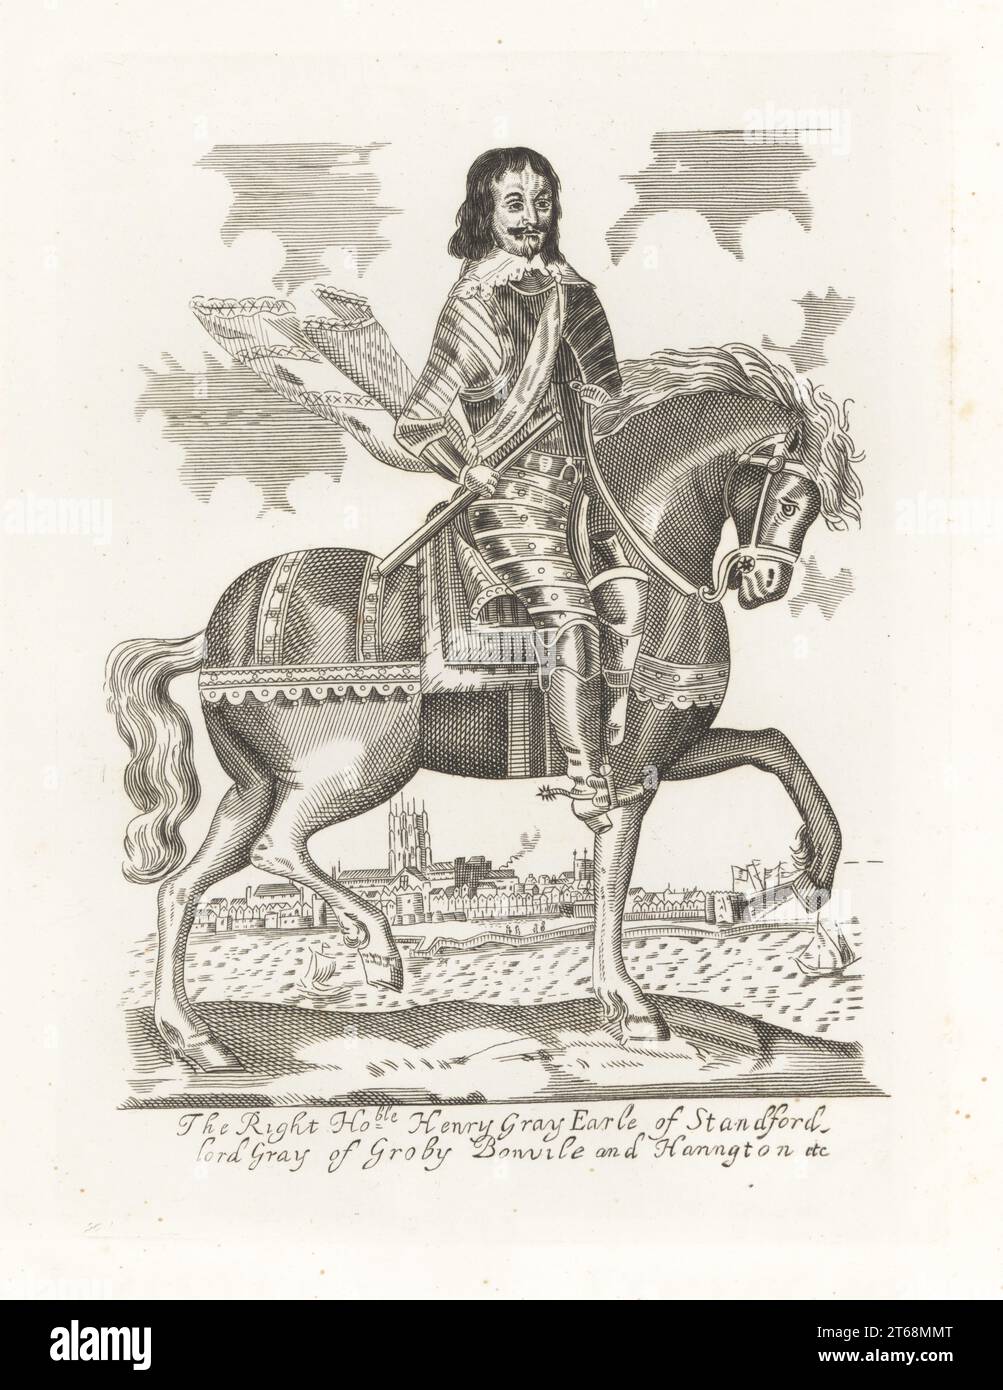 Henry Grey, 1st Earl of Stamford, c. 1599-1673. English nobleman and military leader. Roundhead general defeated at the siege of Exeter. Vignette of Exeter Cathedral and the River Exe. On horseback, in lace collar, suit of plate armour, boots and spurs. Henry Gray, Earl of Standford, Lord of Groby, Bonvile and Harrington. From the unique equestrian print in Earl Spenser's Clarendon. Copperplate engraving from Samuel Woodburns Gallery of Rare Portraits Consisting of Original Plates, George Jones, 102 St Martins Lane, London, 1816. Stock Photo